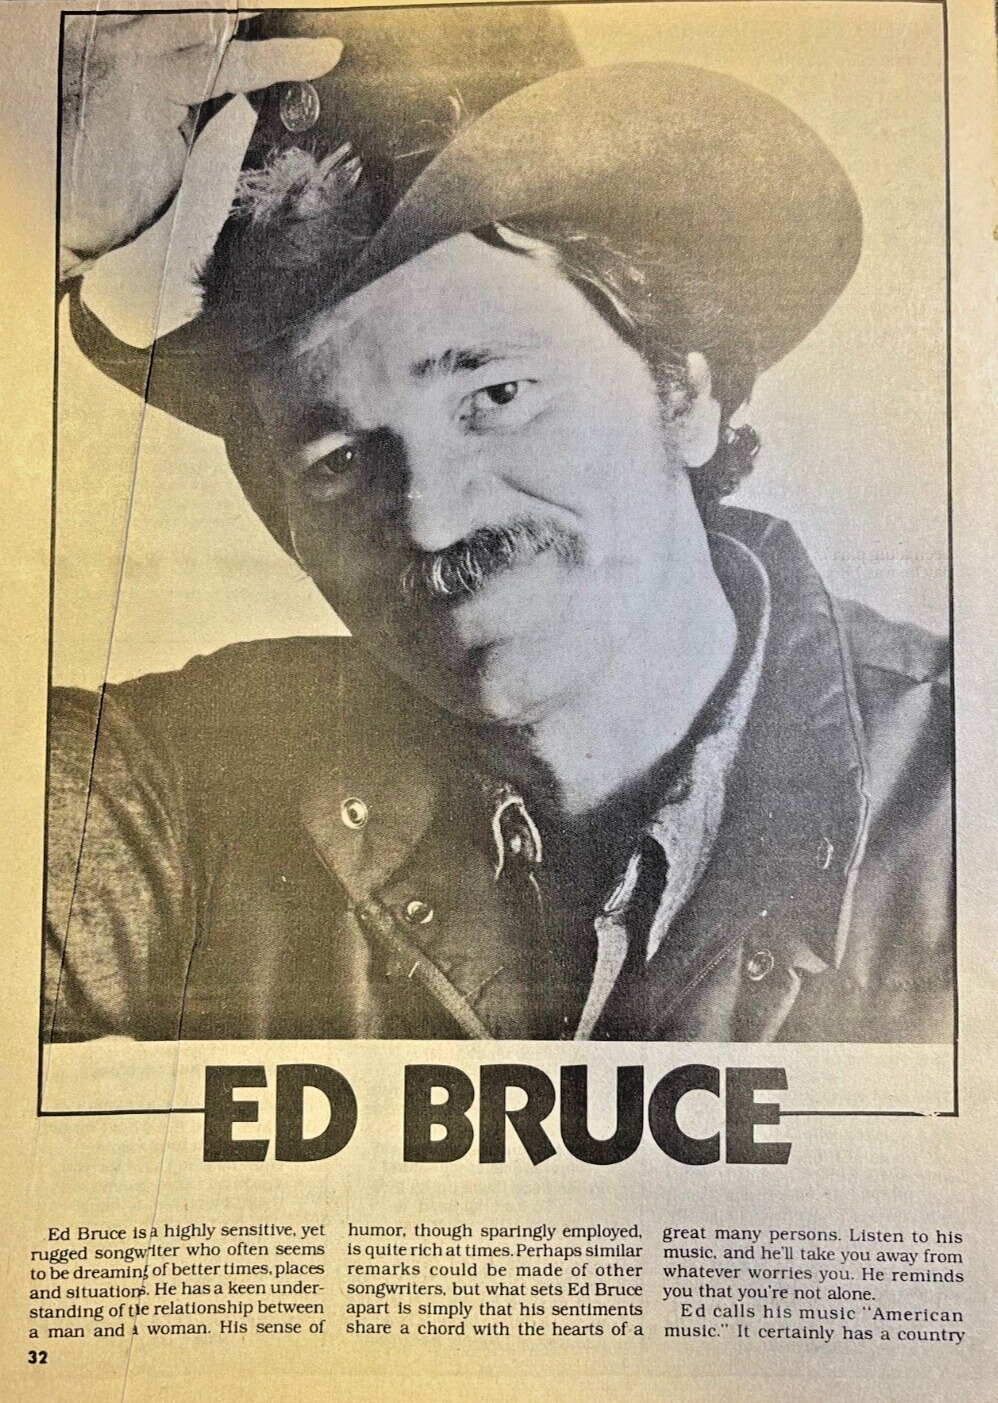 1981 Country Western Musician Actor Ed Bruce